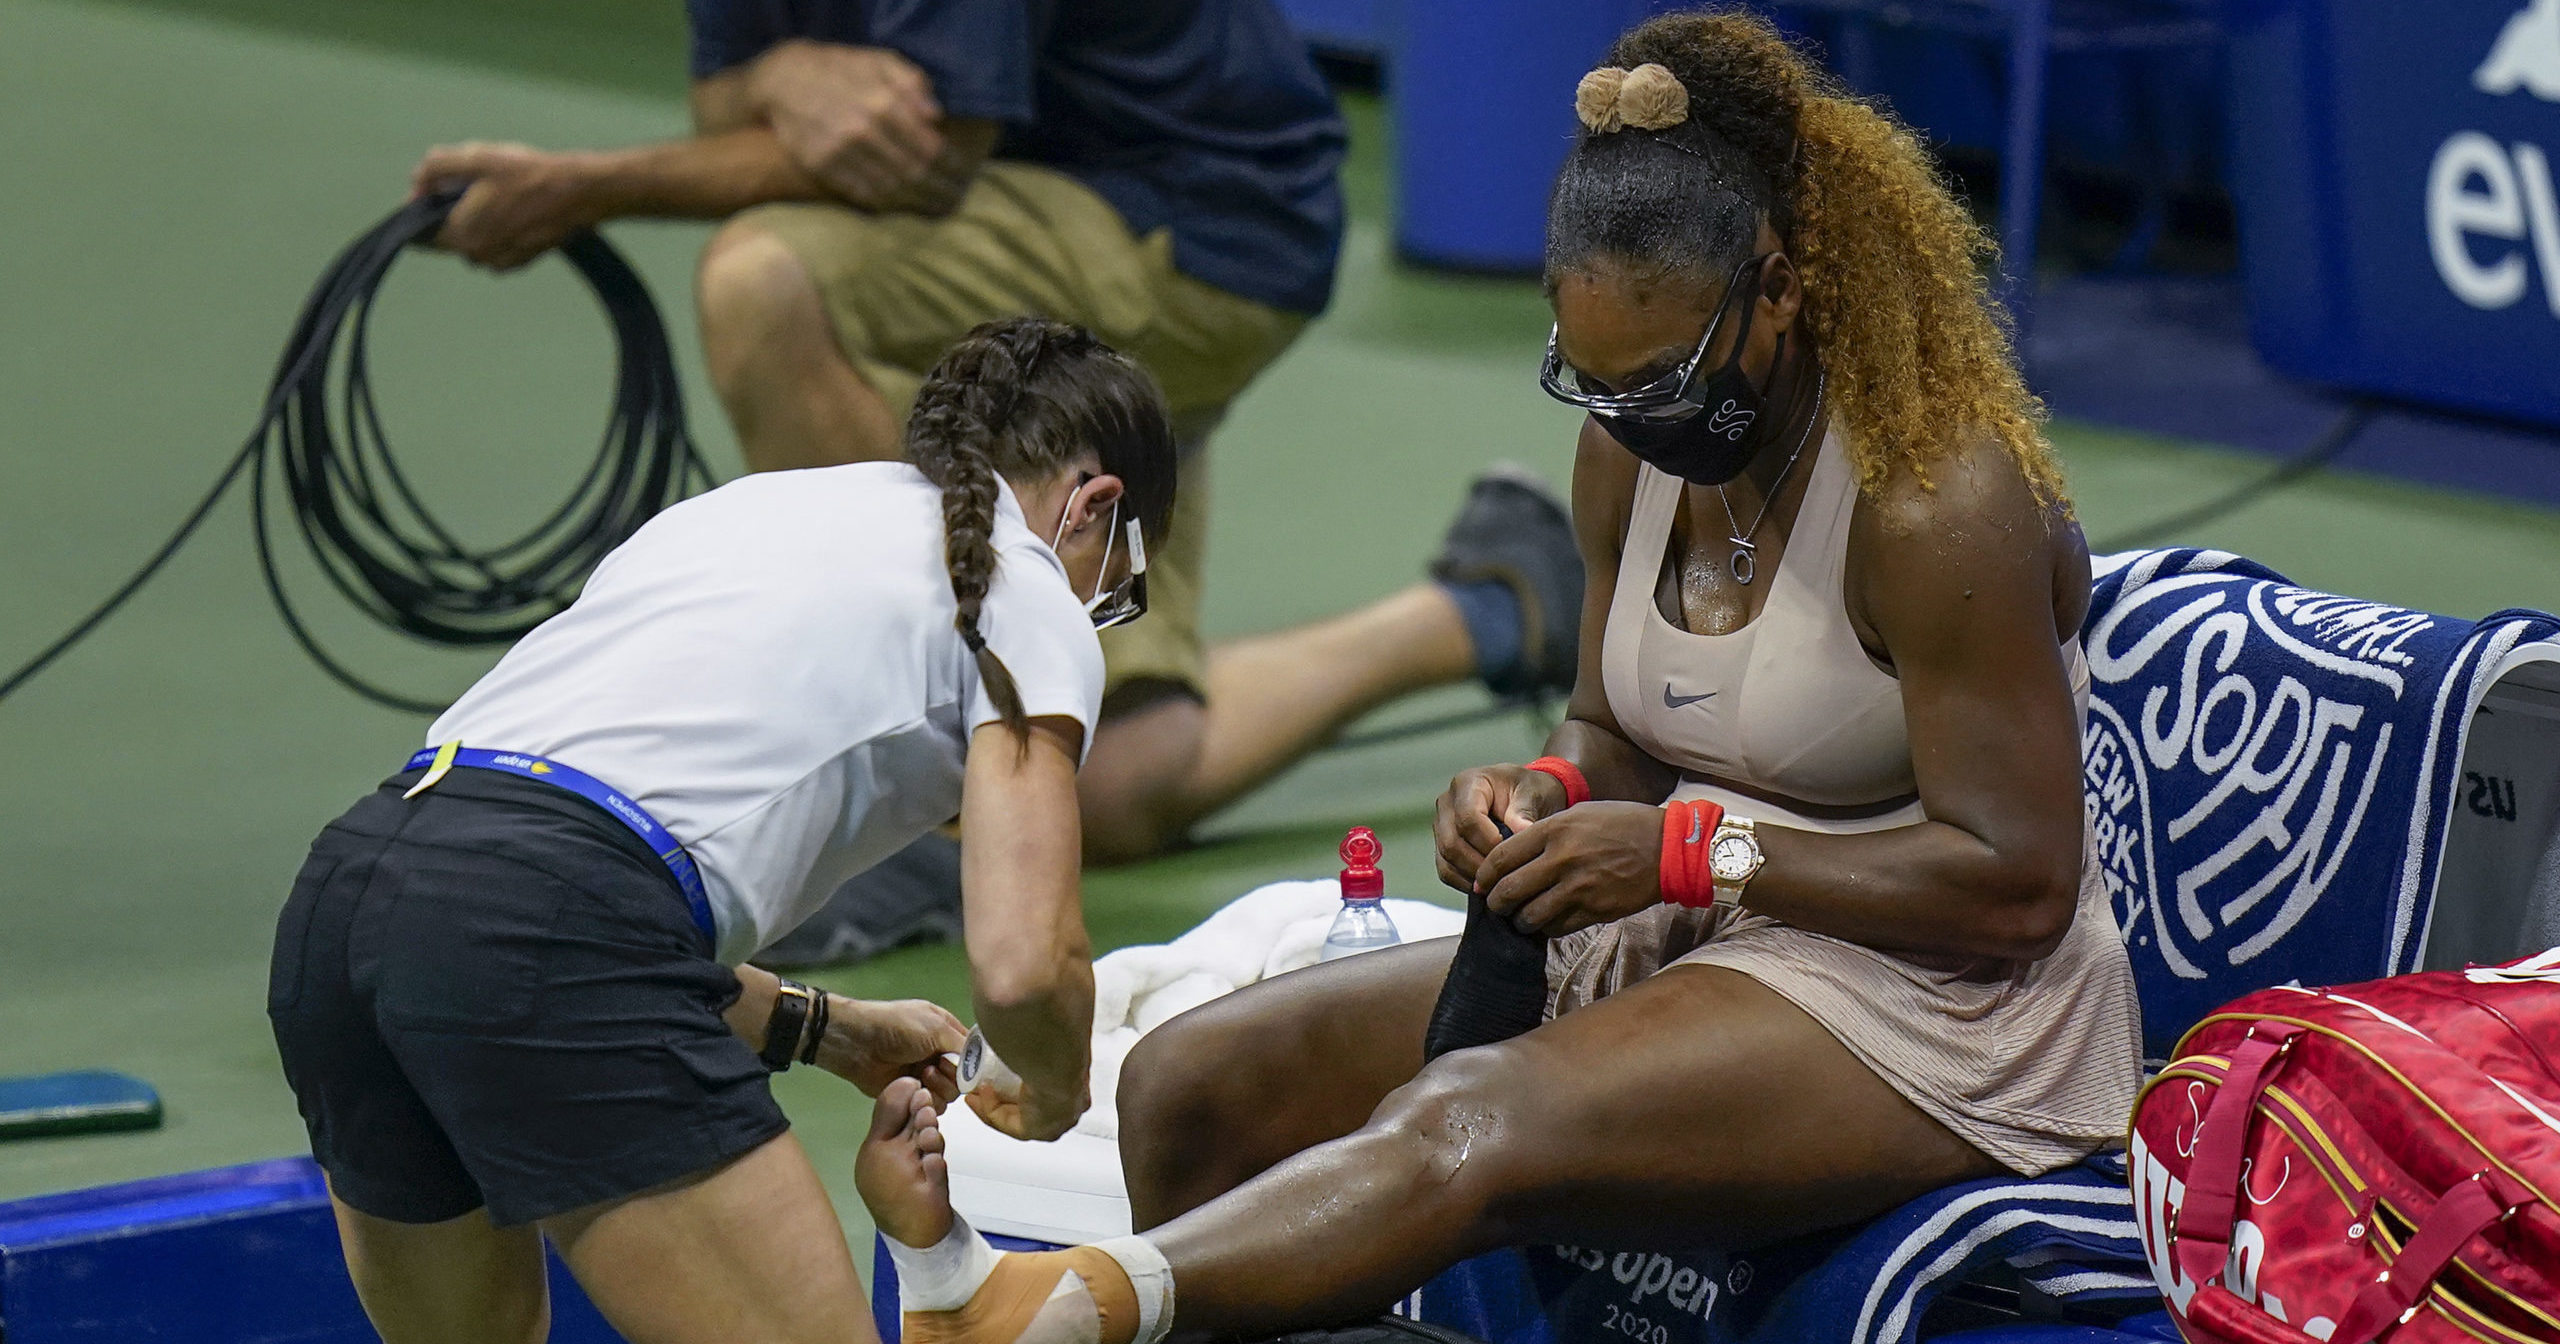 Serena Williams, of the United States, has her ankle taped by a trainer during a medical timeout during a semifinal match of the US Open tennis championships against Victoria Azarenka, of Belarus on Sept. 10, 2020, in New York